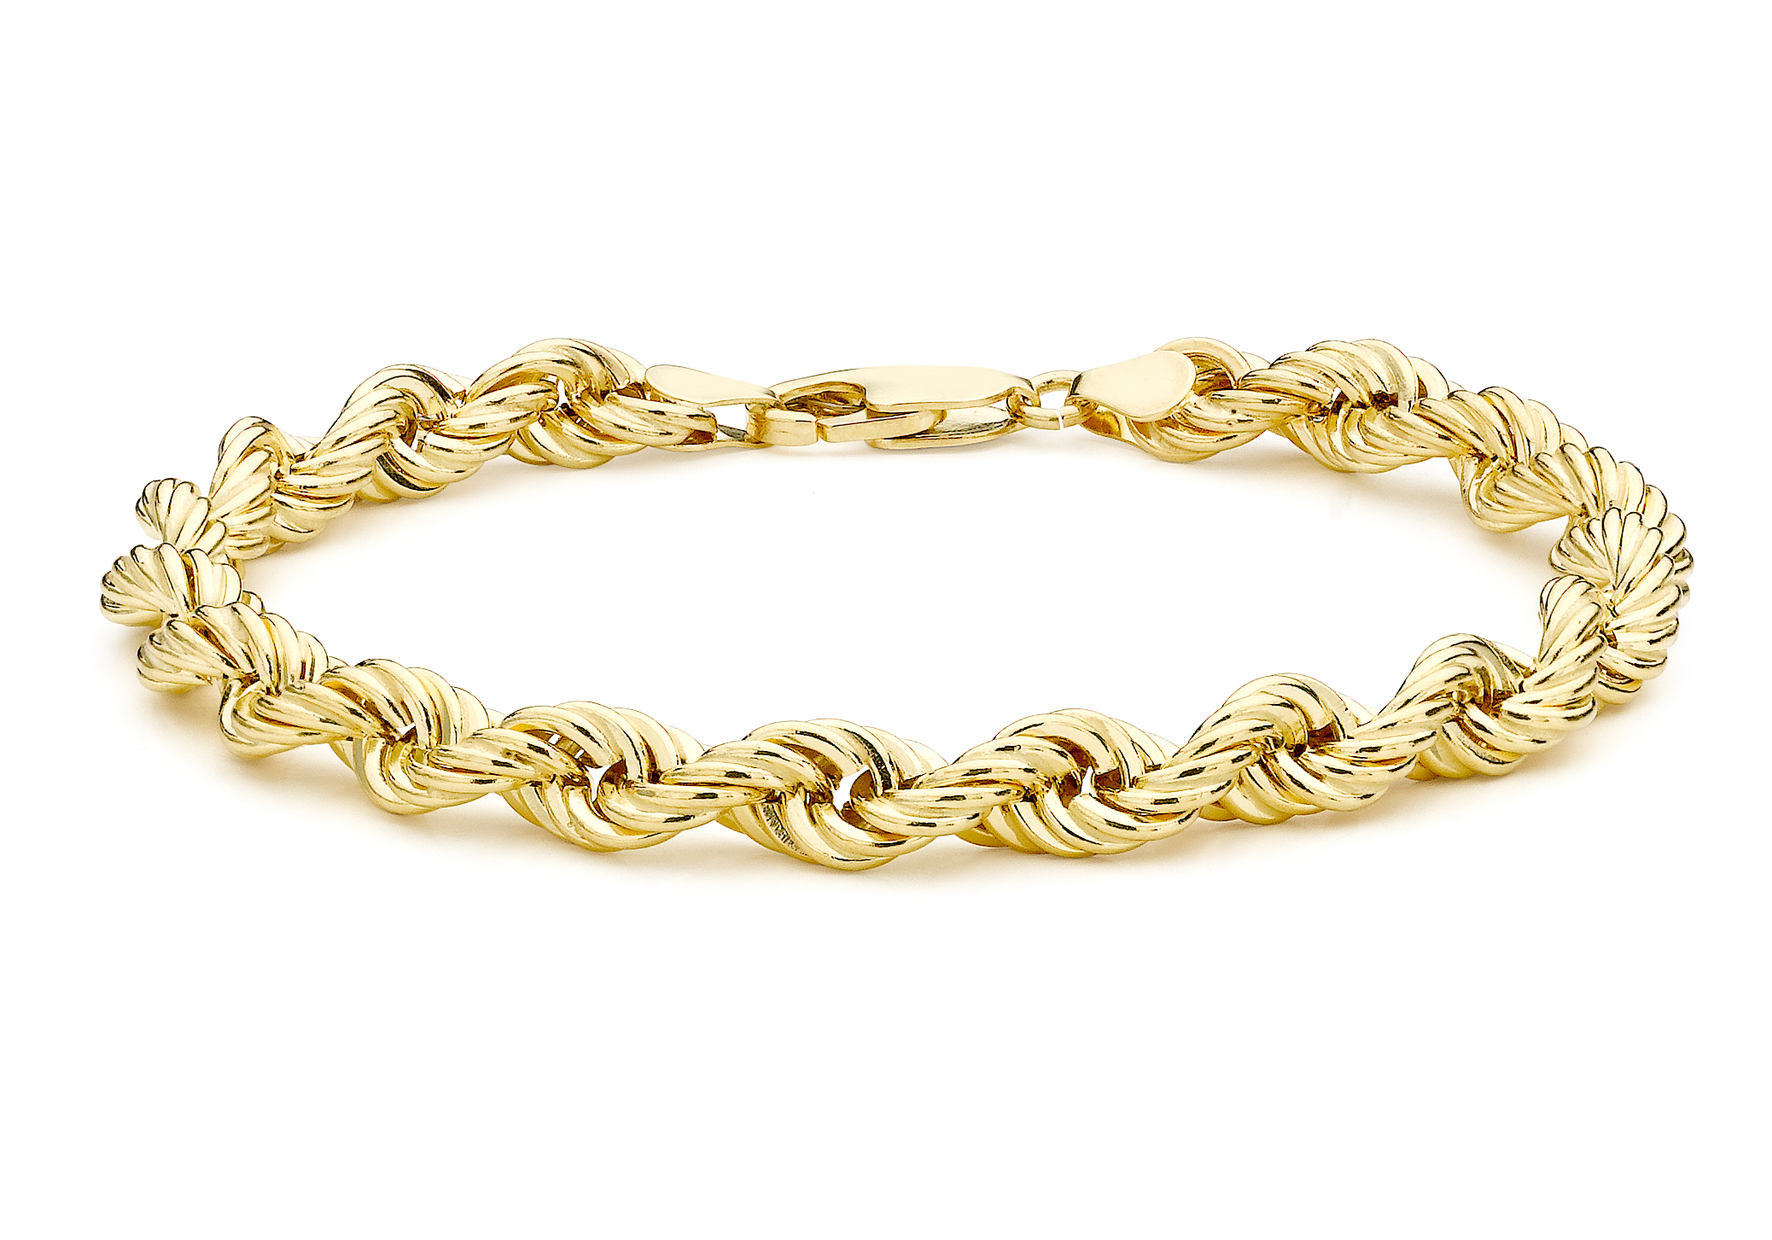 9ct Yellow Gold Rope Chain Bracelet